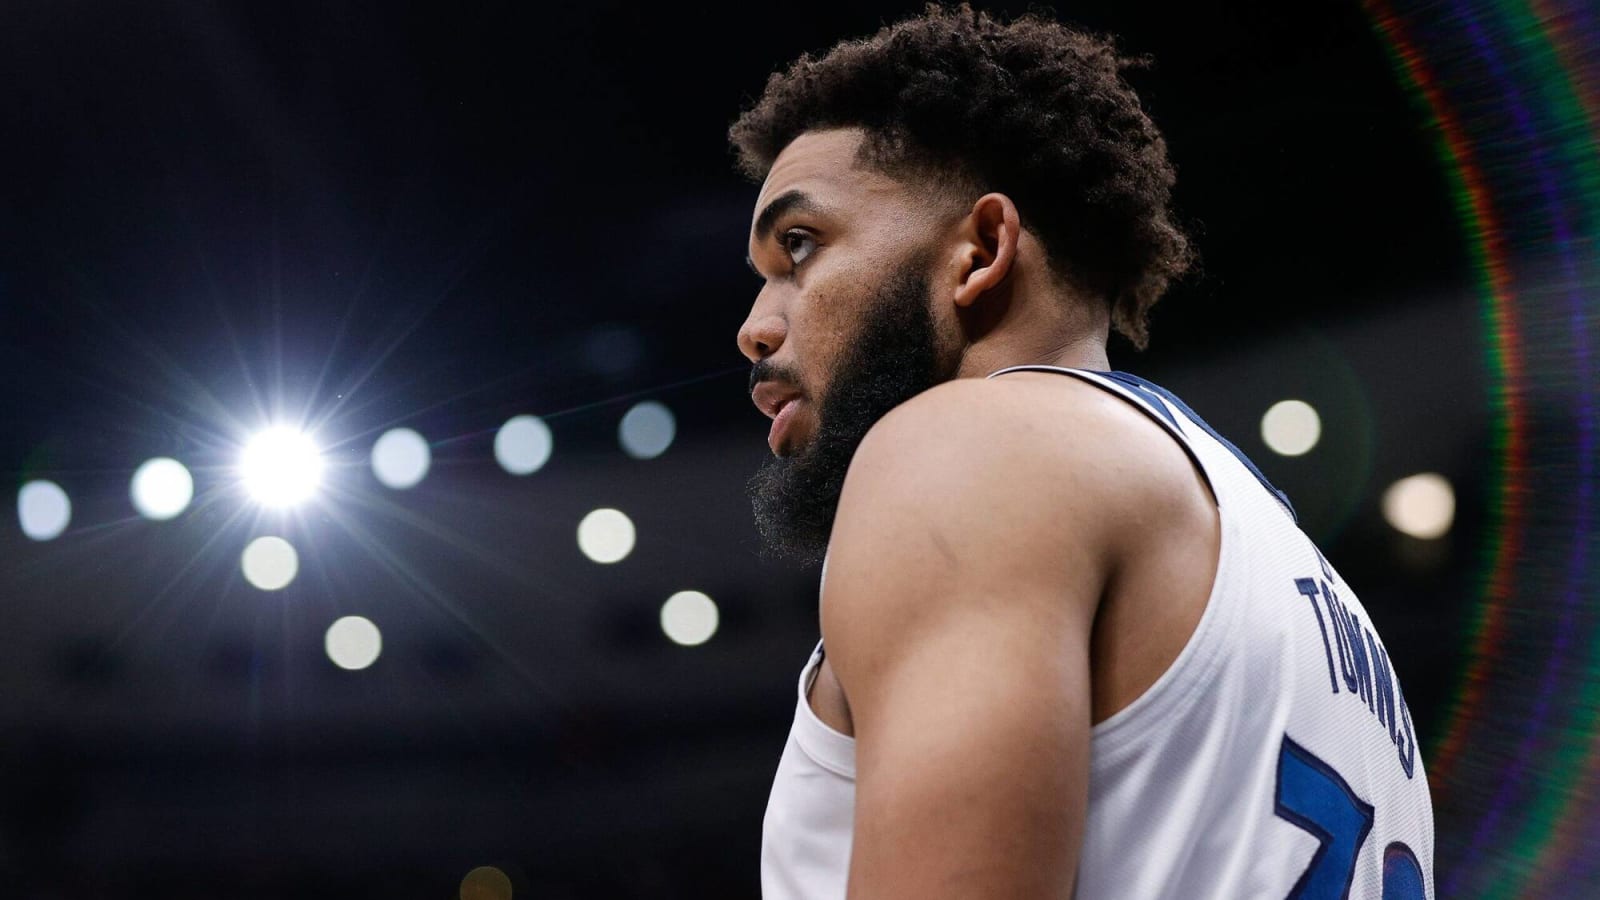 Karl-Anthony Towns Looks Locked In Ahead of Biggest Game of His Career